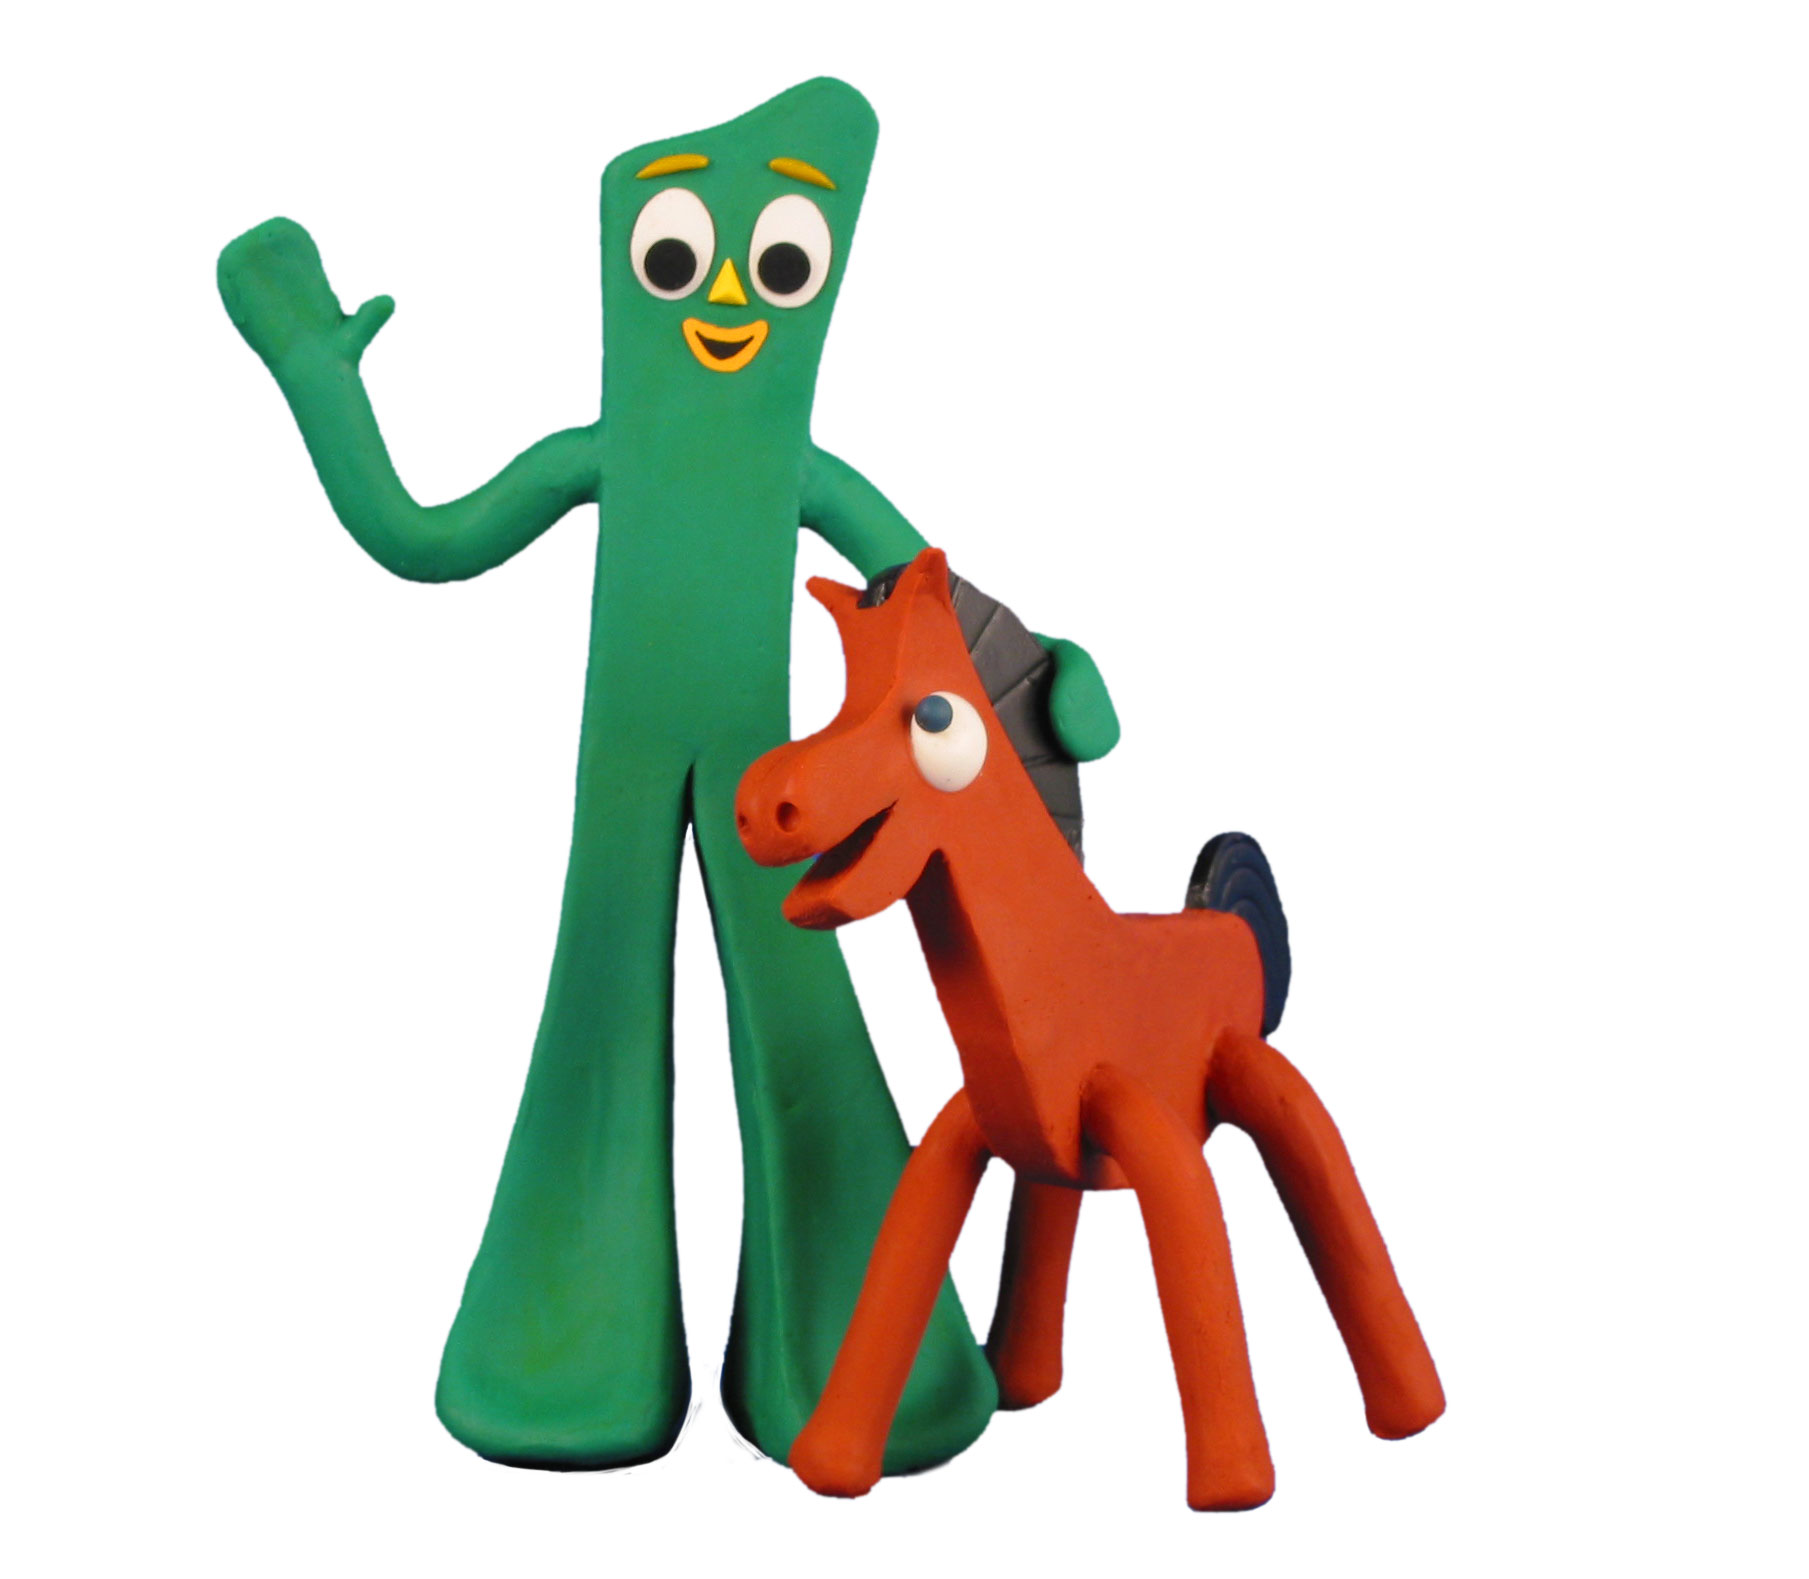  - gumby2